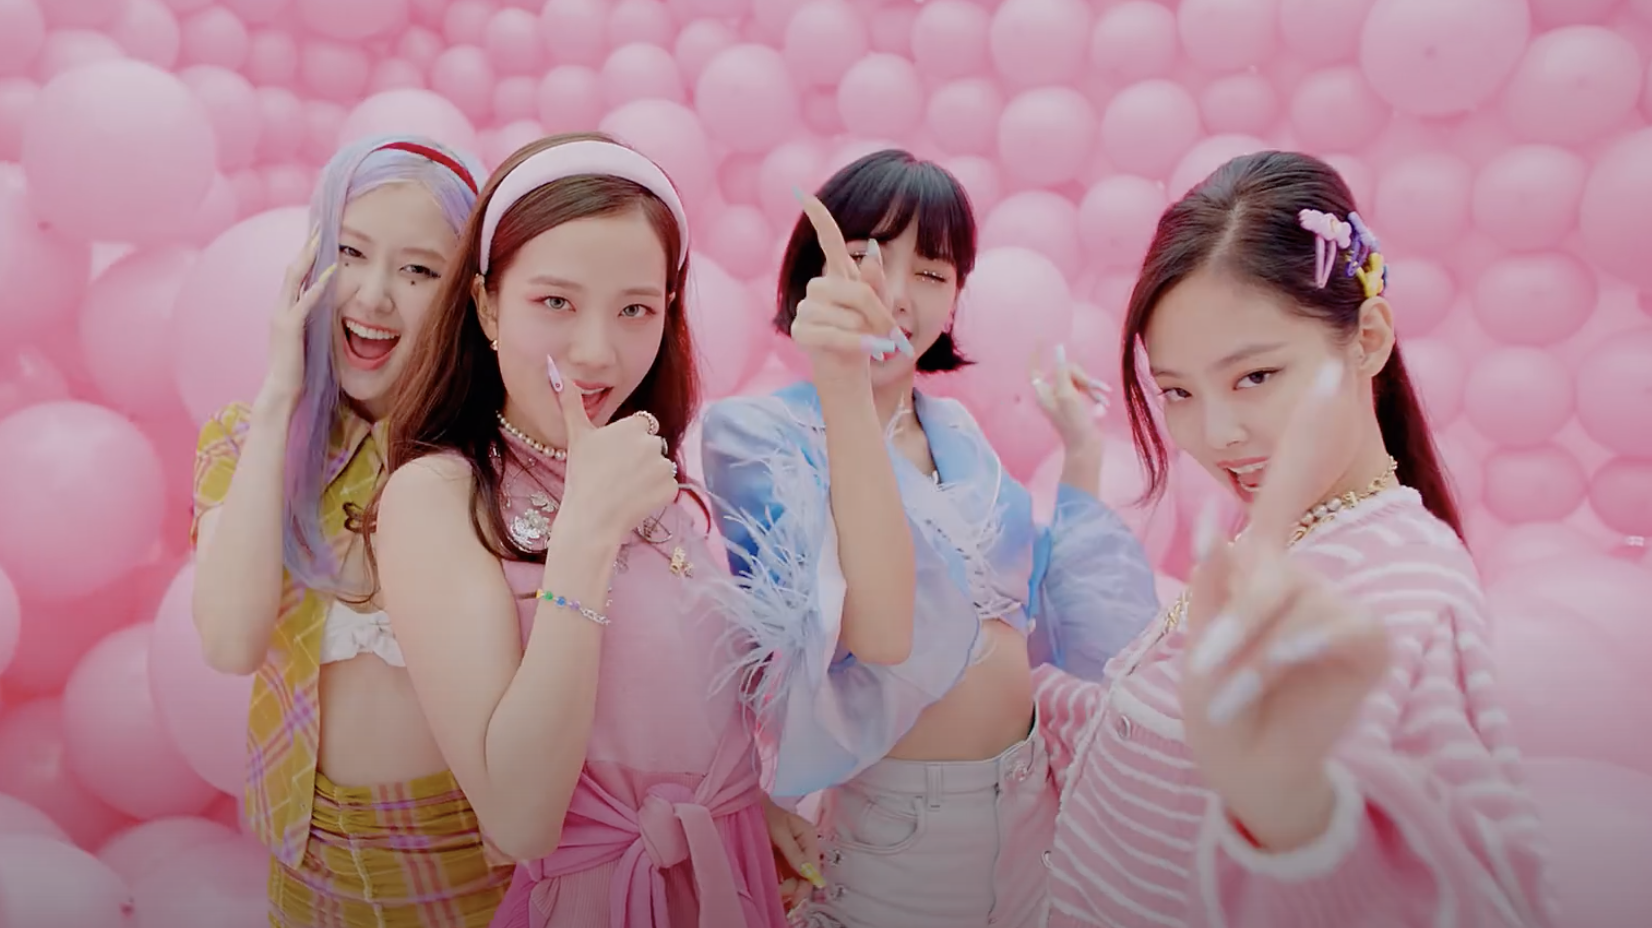 The outfits in the video for Blackpink’s new collaborative track Ice Cream with Selena Gomez have caught the eye of many viewers. We analyse their personal fashion styles both on and offstage.